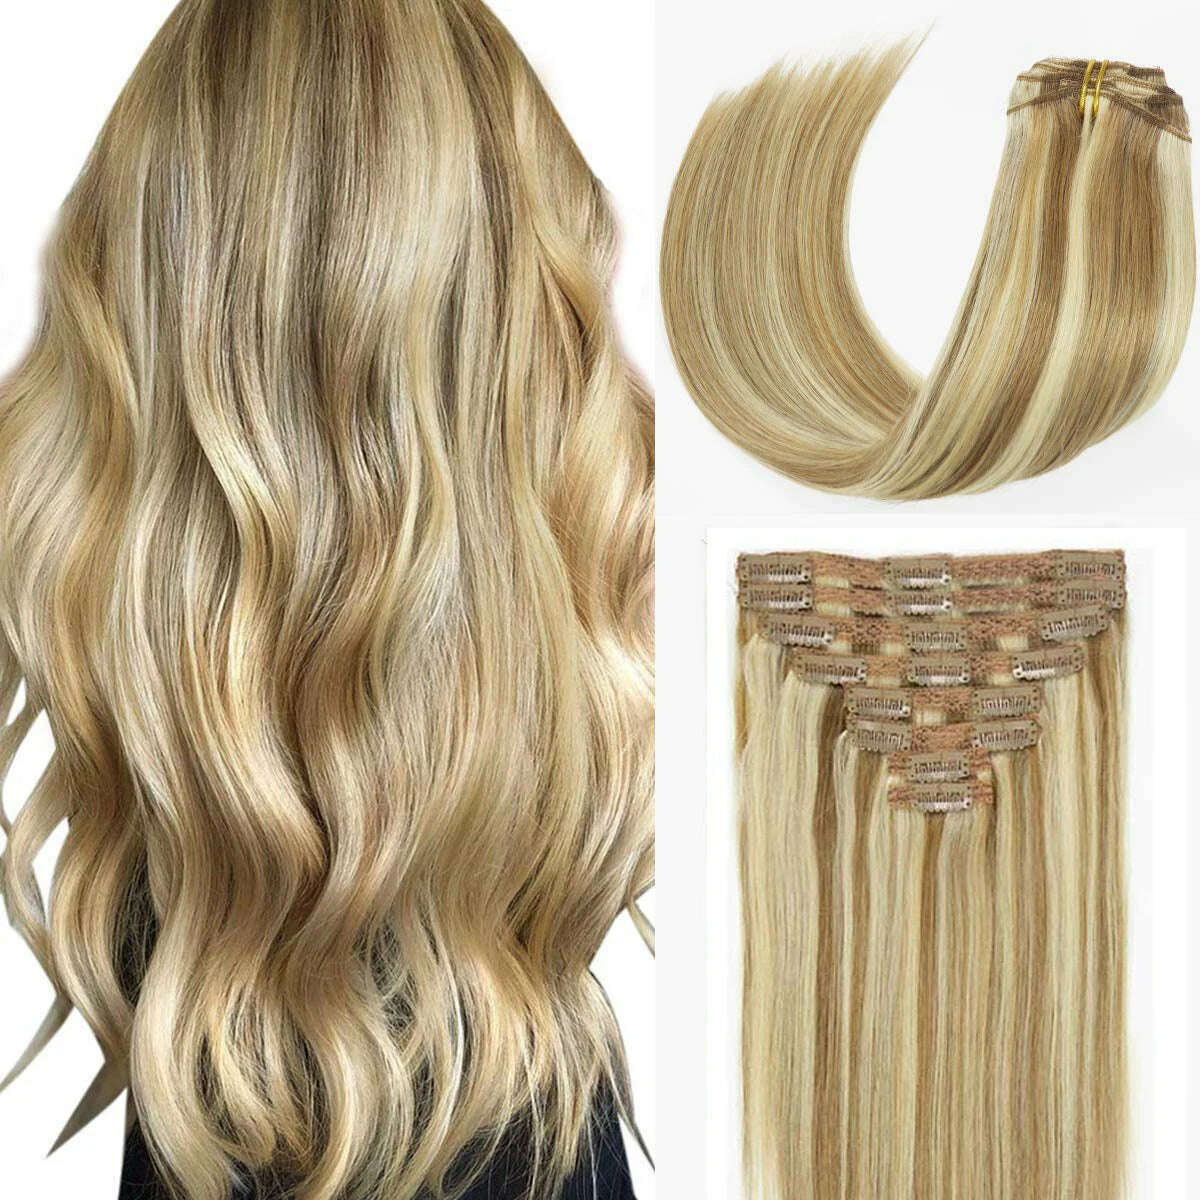 120G Clip In Hair Extension Human Hair Color P8/613 Straight Brazilian 100% Human Hair Extension Clip In 8 Pieces/Sets Full Head, P8-613 / 120g/Set / 16inches, KIMLUD Women's Clothes